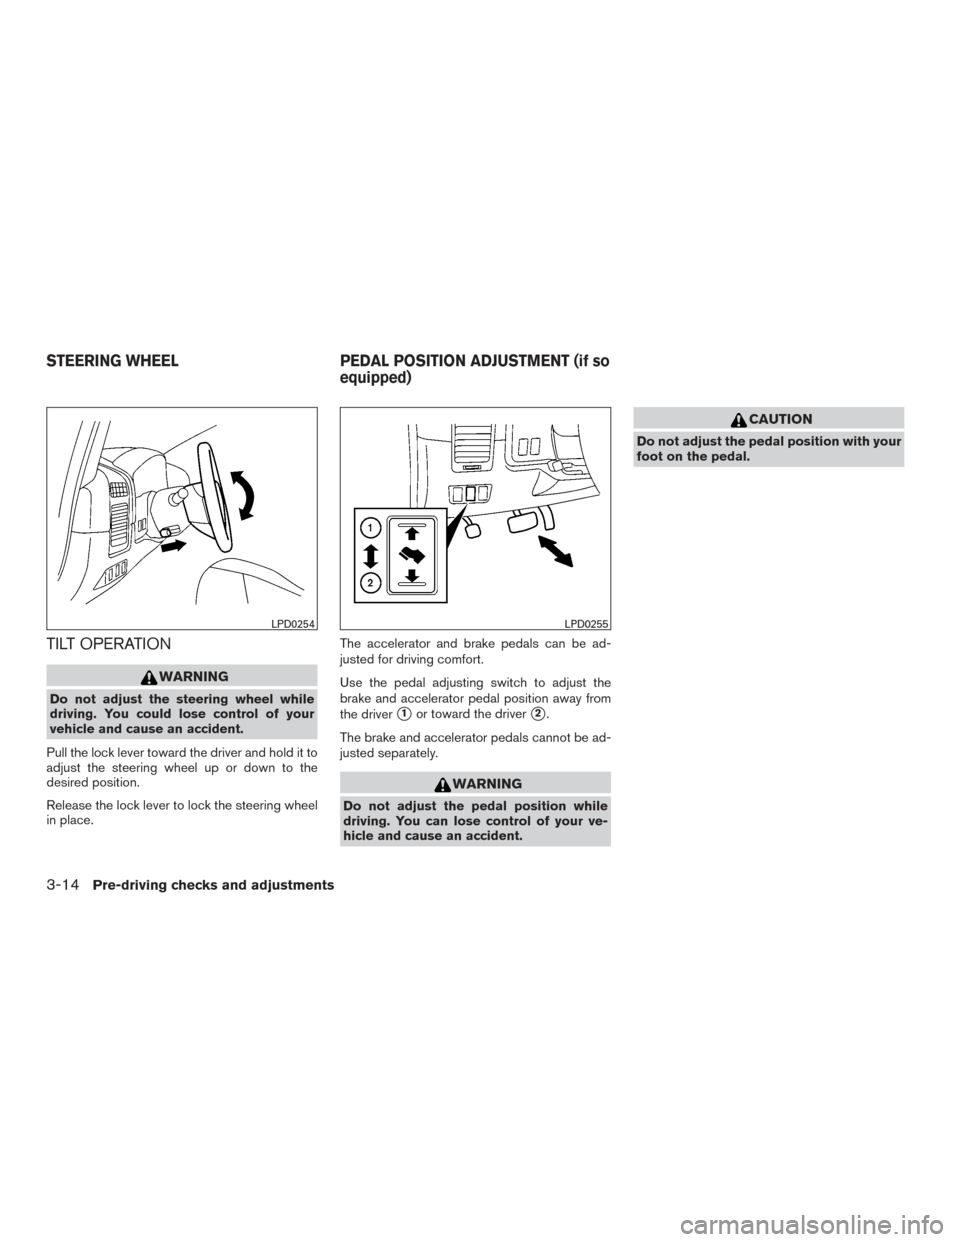 NISSAN TITAN 2015 1.G User Guide TILT OPERATION
WARNING
Do not adjust the steering wheel while
driving. You could lose control of your
vehicle and cause an accident.
Pull the lock lever toward the driver and hold it to
adjust the ste